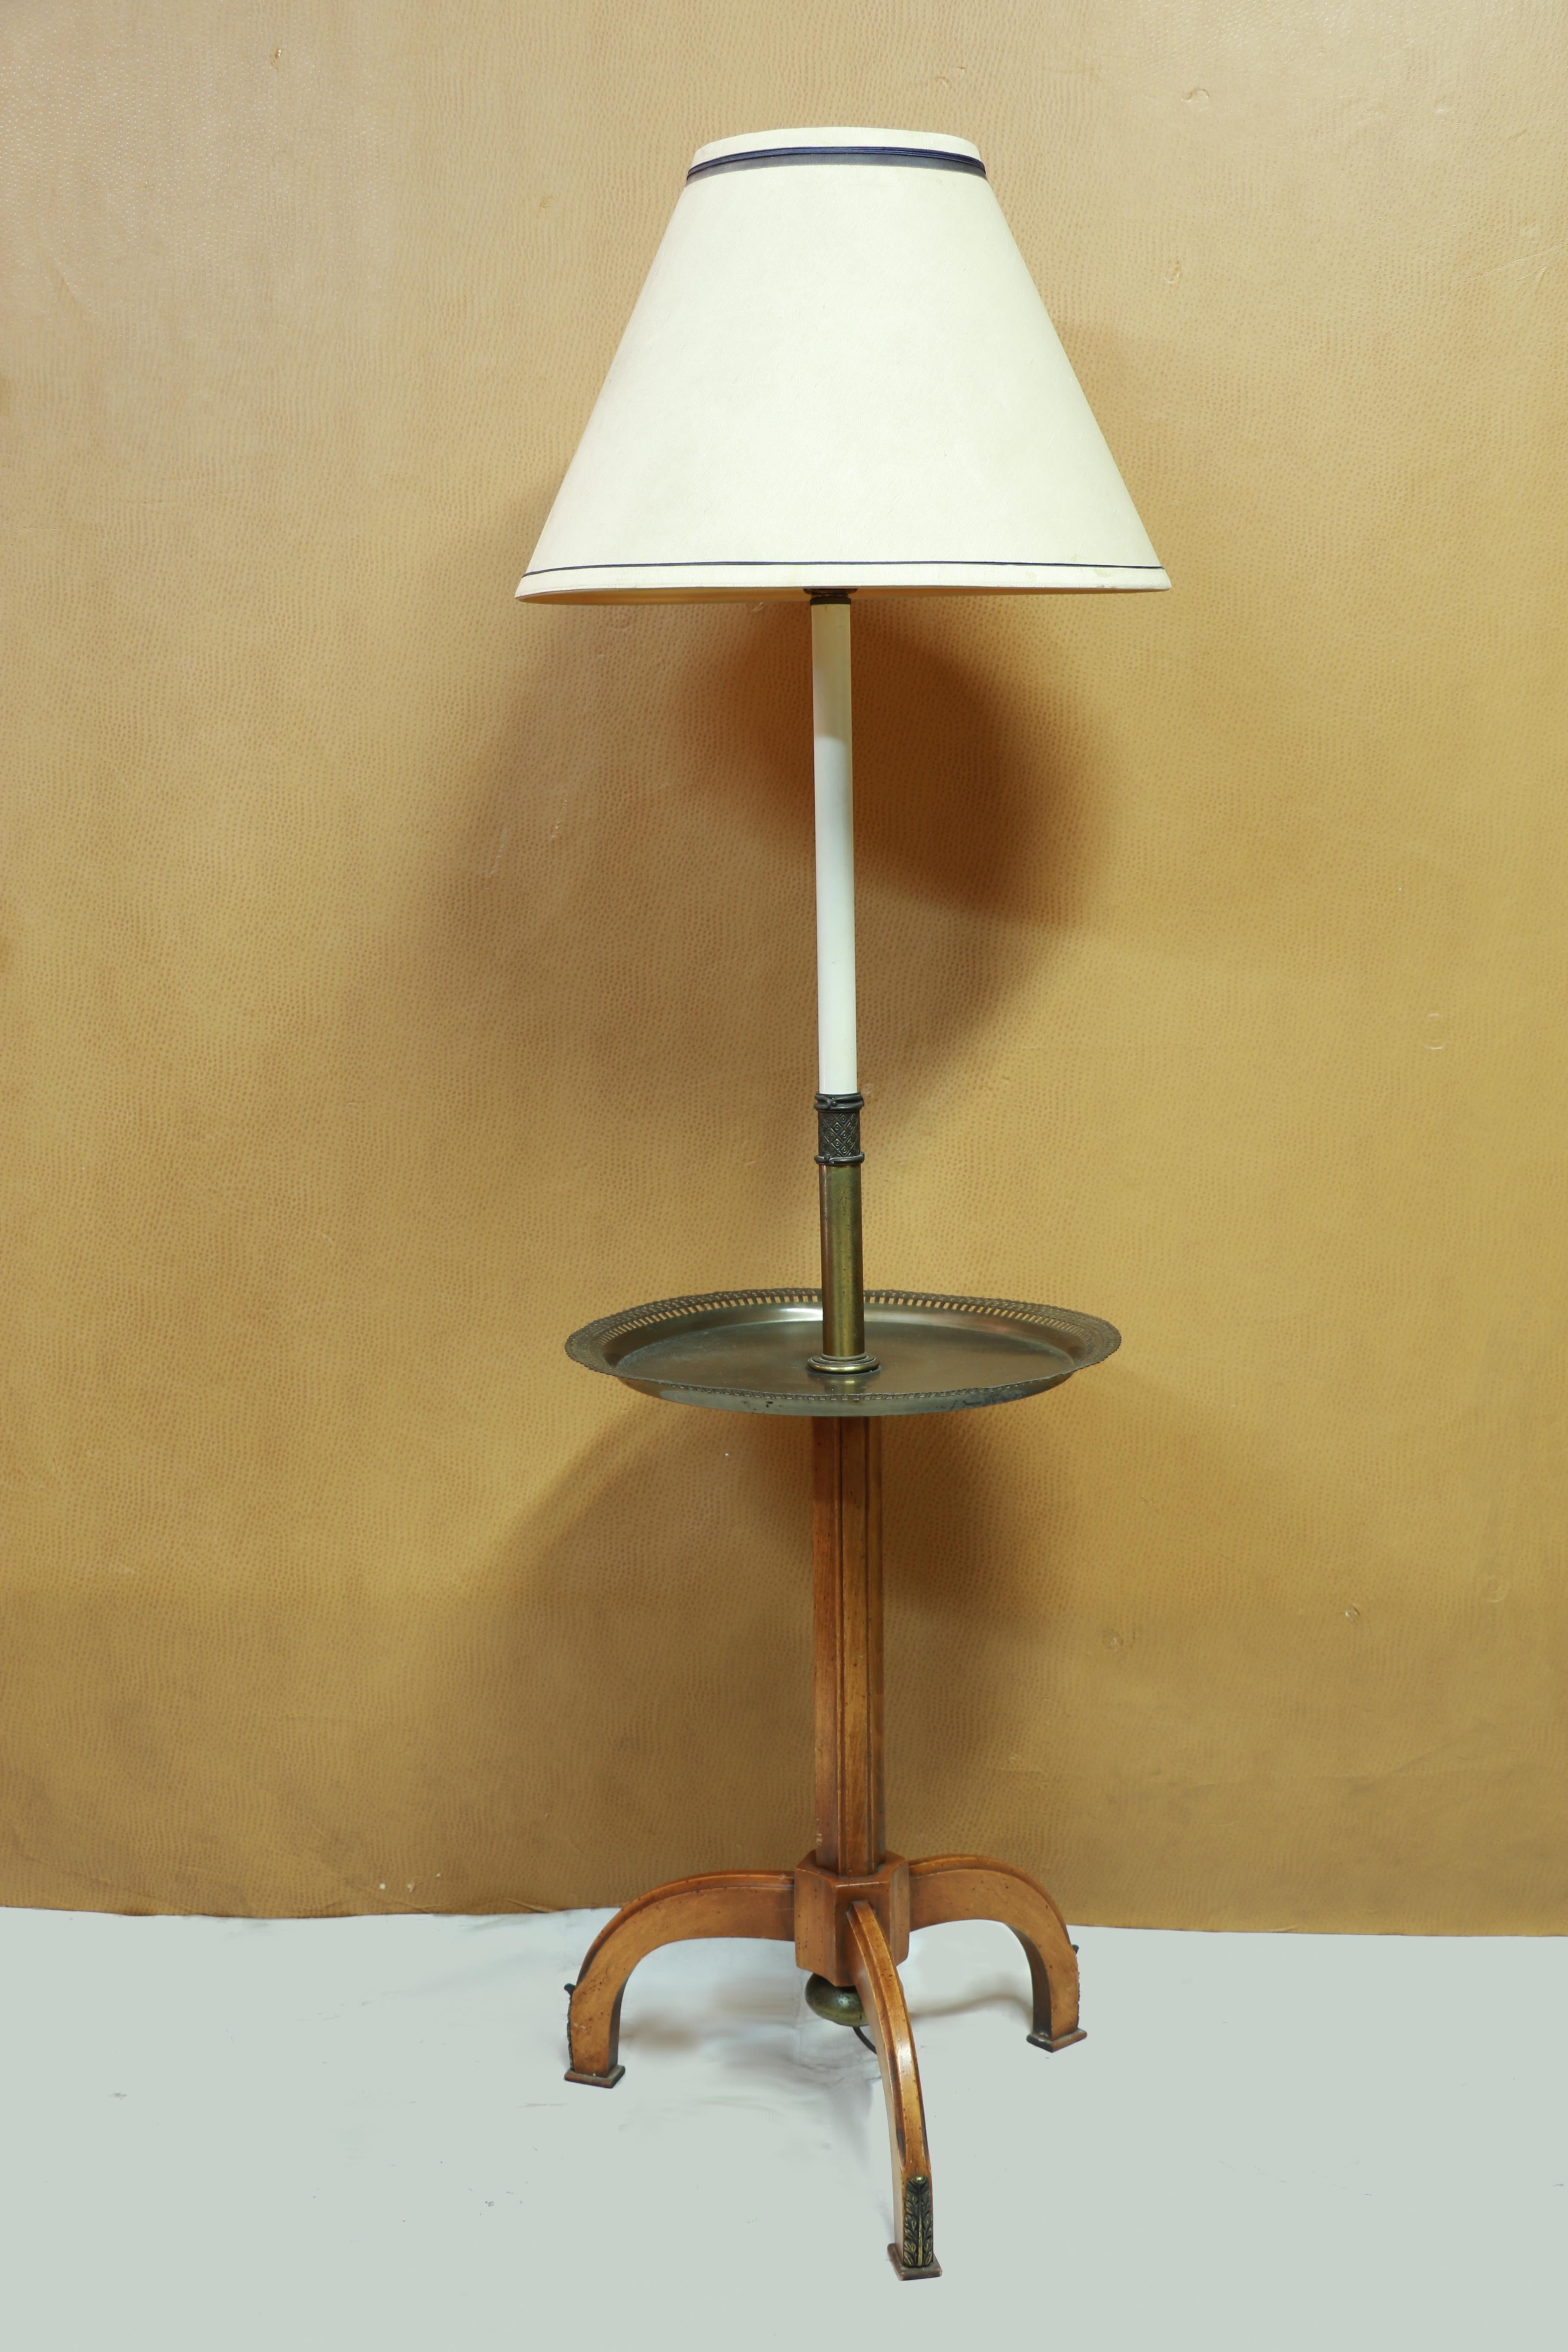 This table and floor lamp gives a nod to the Space race and the mid century with its maple tripod base and brass detailing, and original shade. The lamp was designed by Stiffel. It is fantastic. But the quiet part here is really the sophisticated